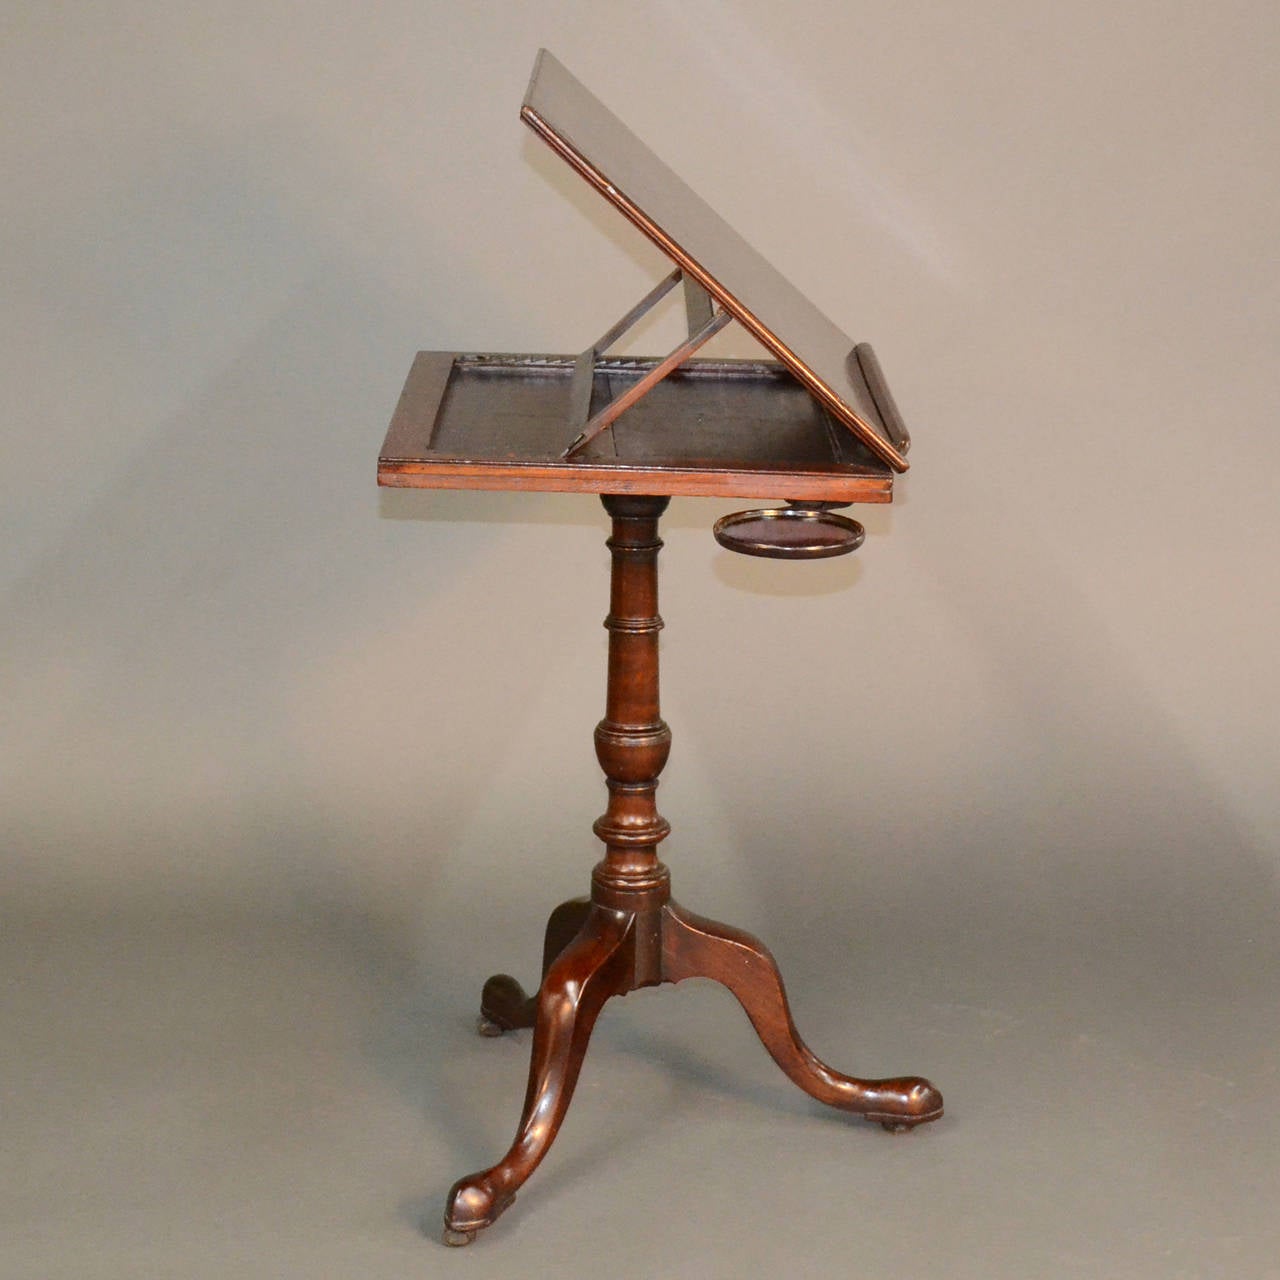 A fantastic antique George III mahogany reading stand with pull-out candle slides or supports. This reading stand has a beautiful patina and is truly an elegant piece of history. The top is adjustable to accommodate different reading heights and the